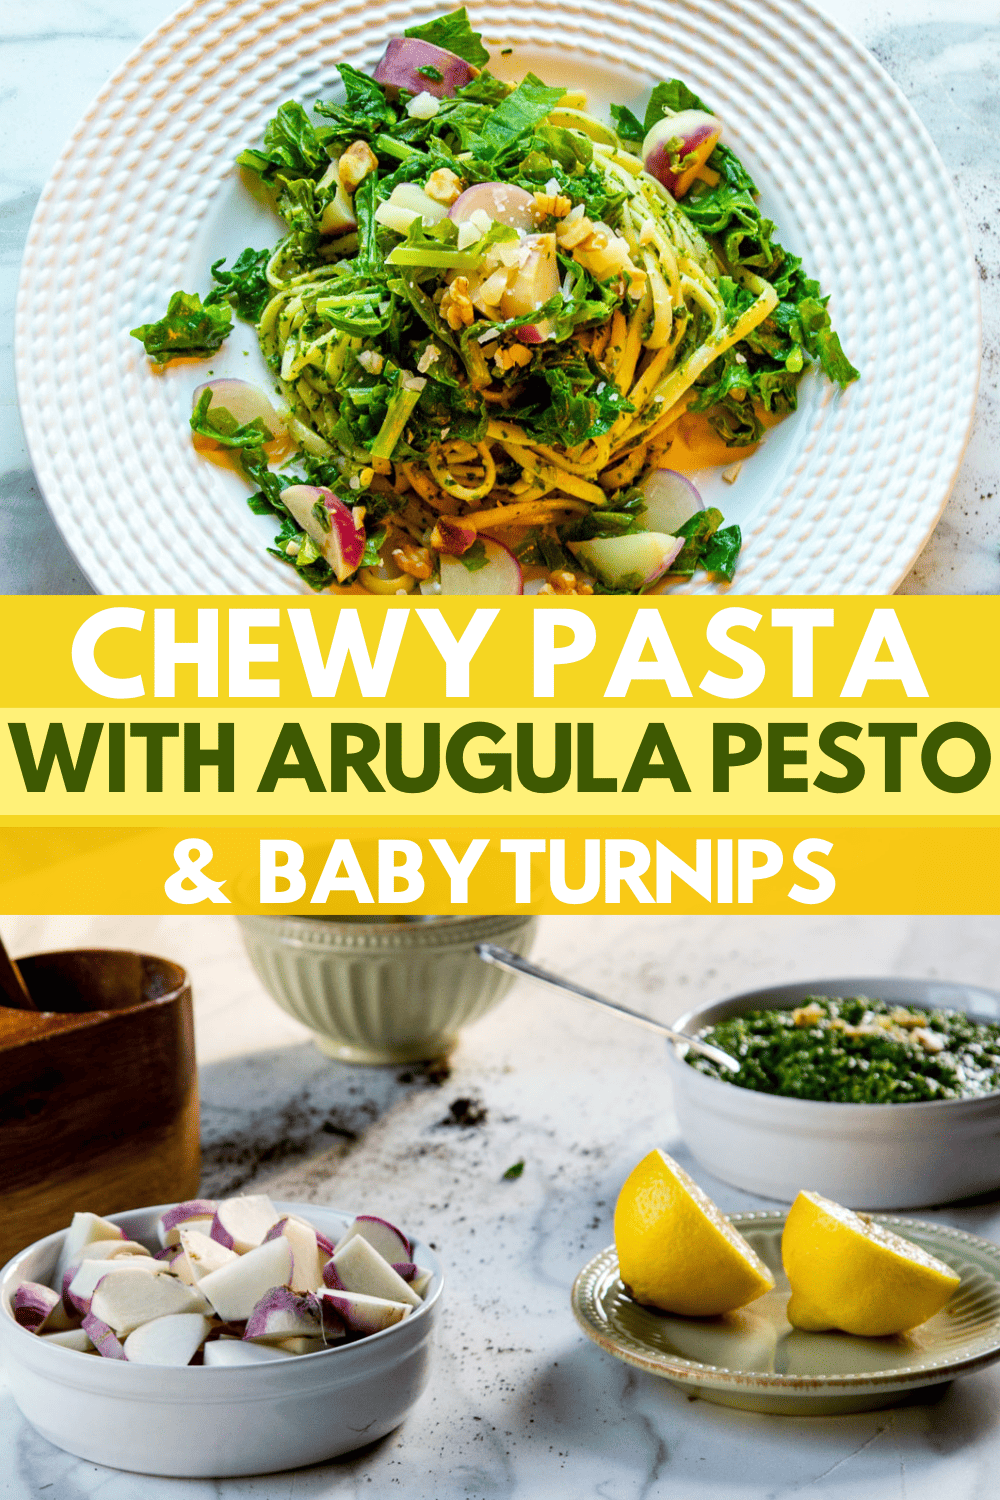 ‘Chewy’ Pasta with Succulent Arugula Pesto & Baby Turnips